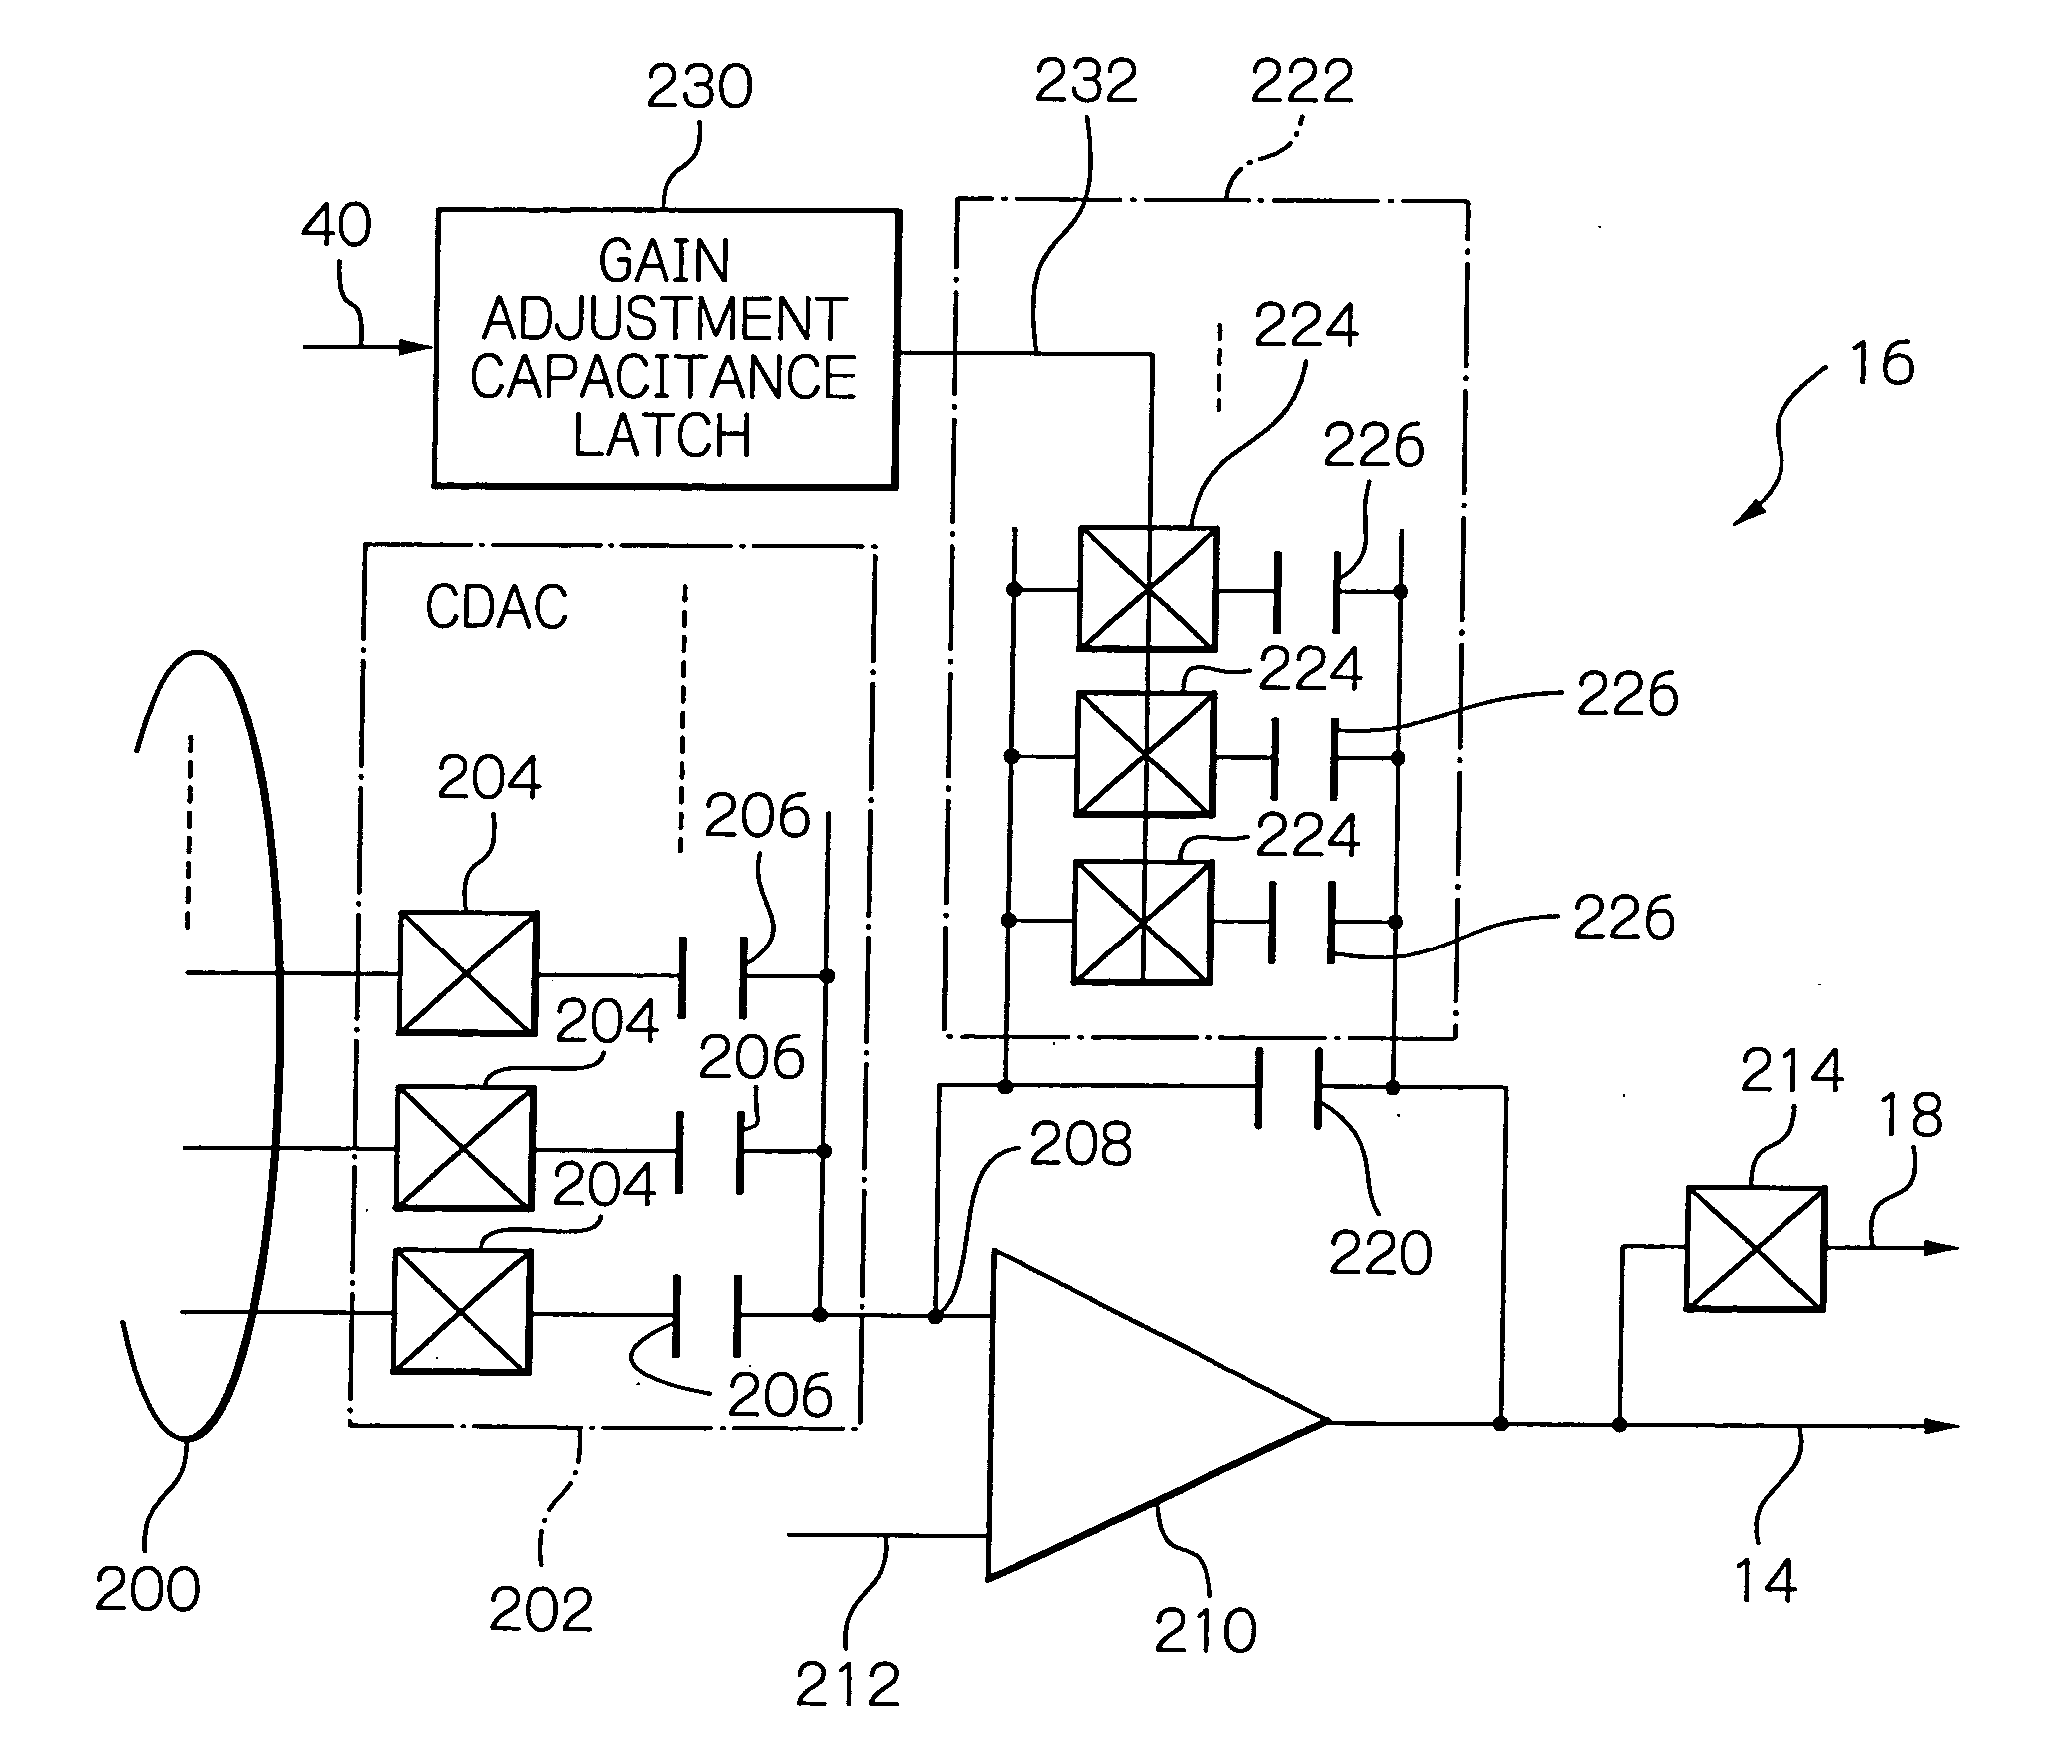 Offset canceller for compensating for offset in signal output